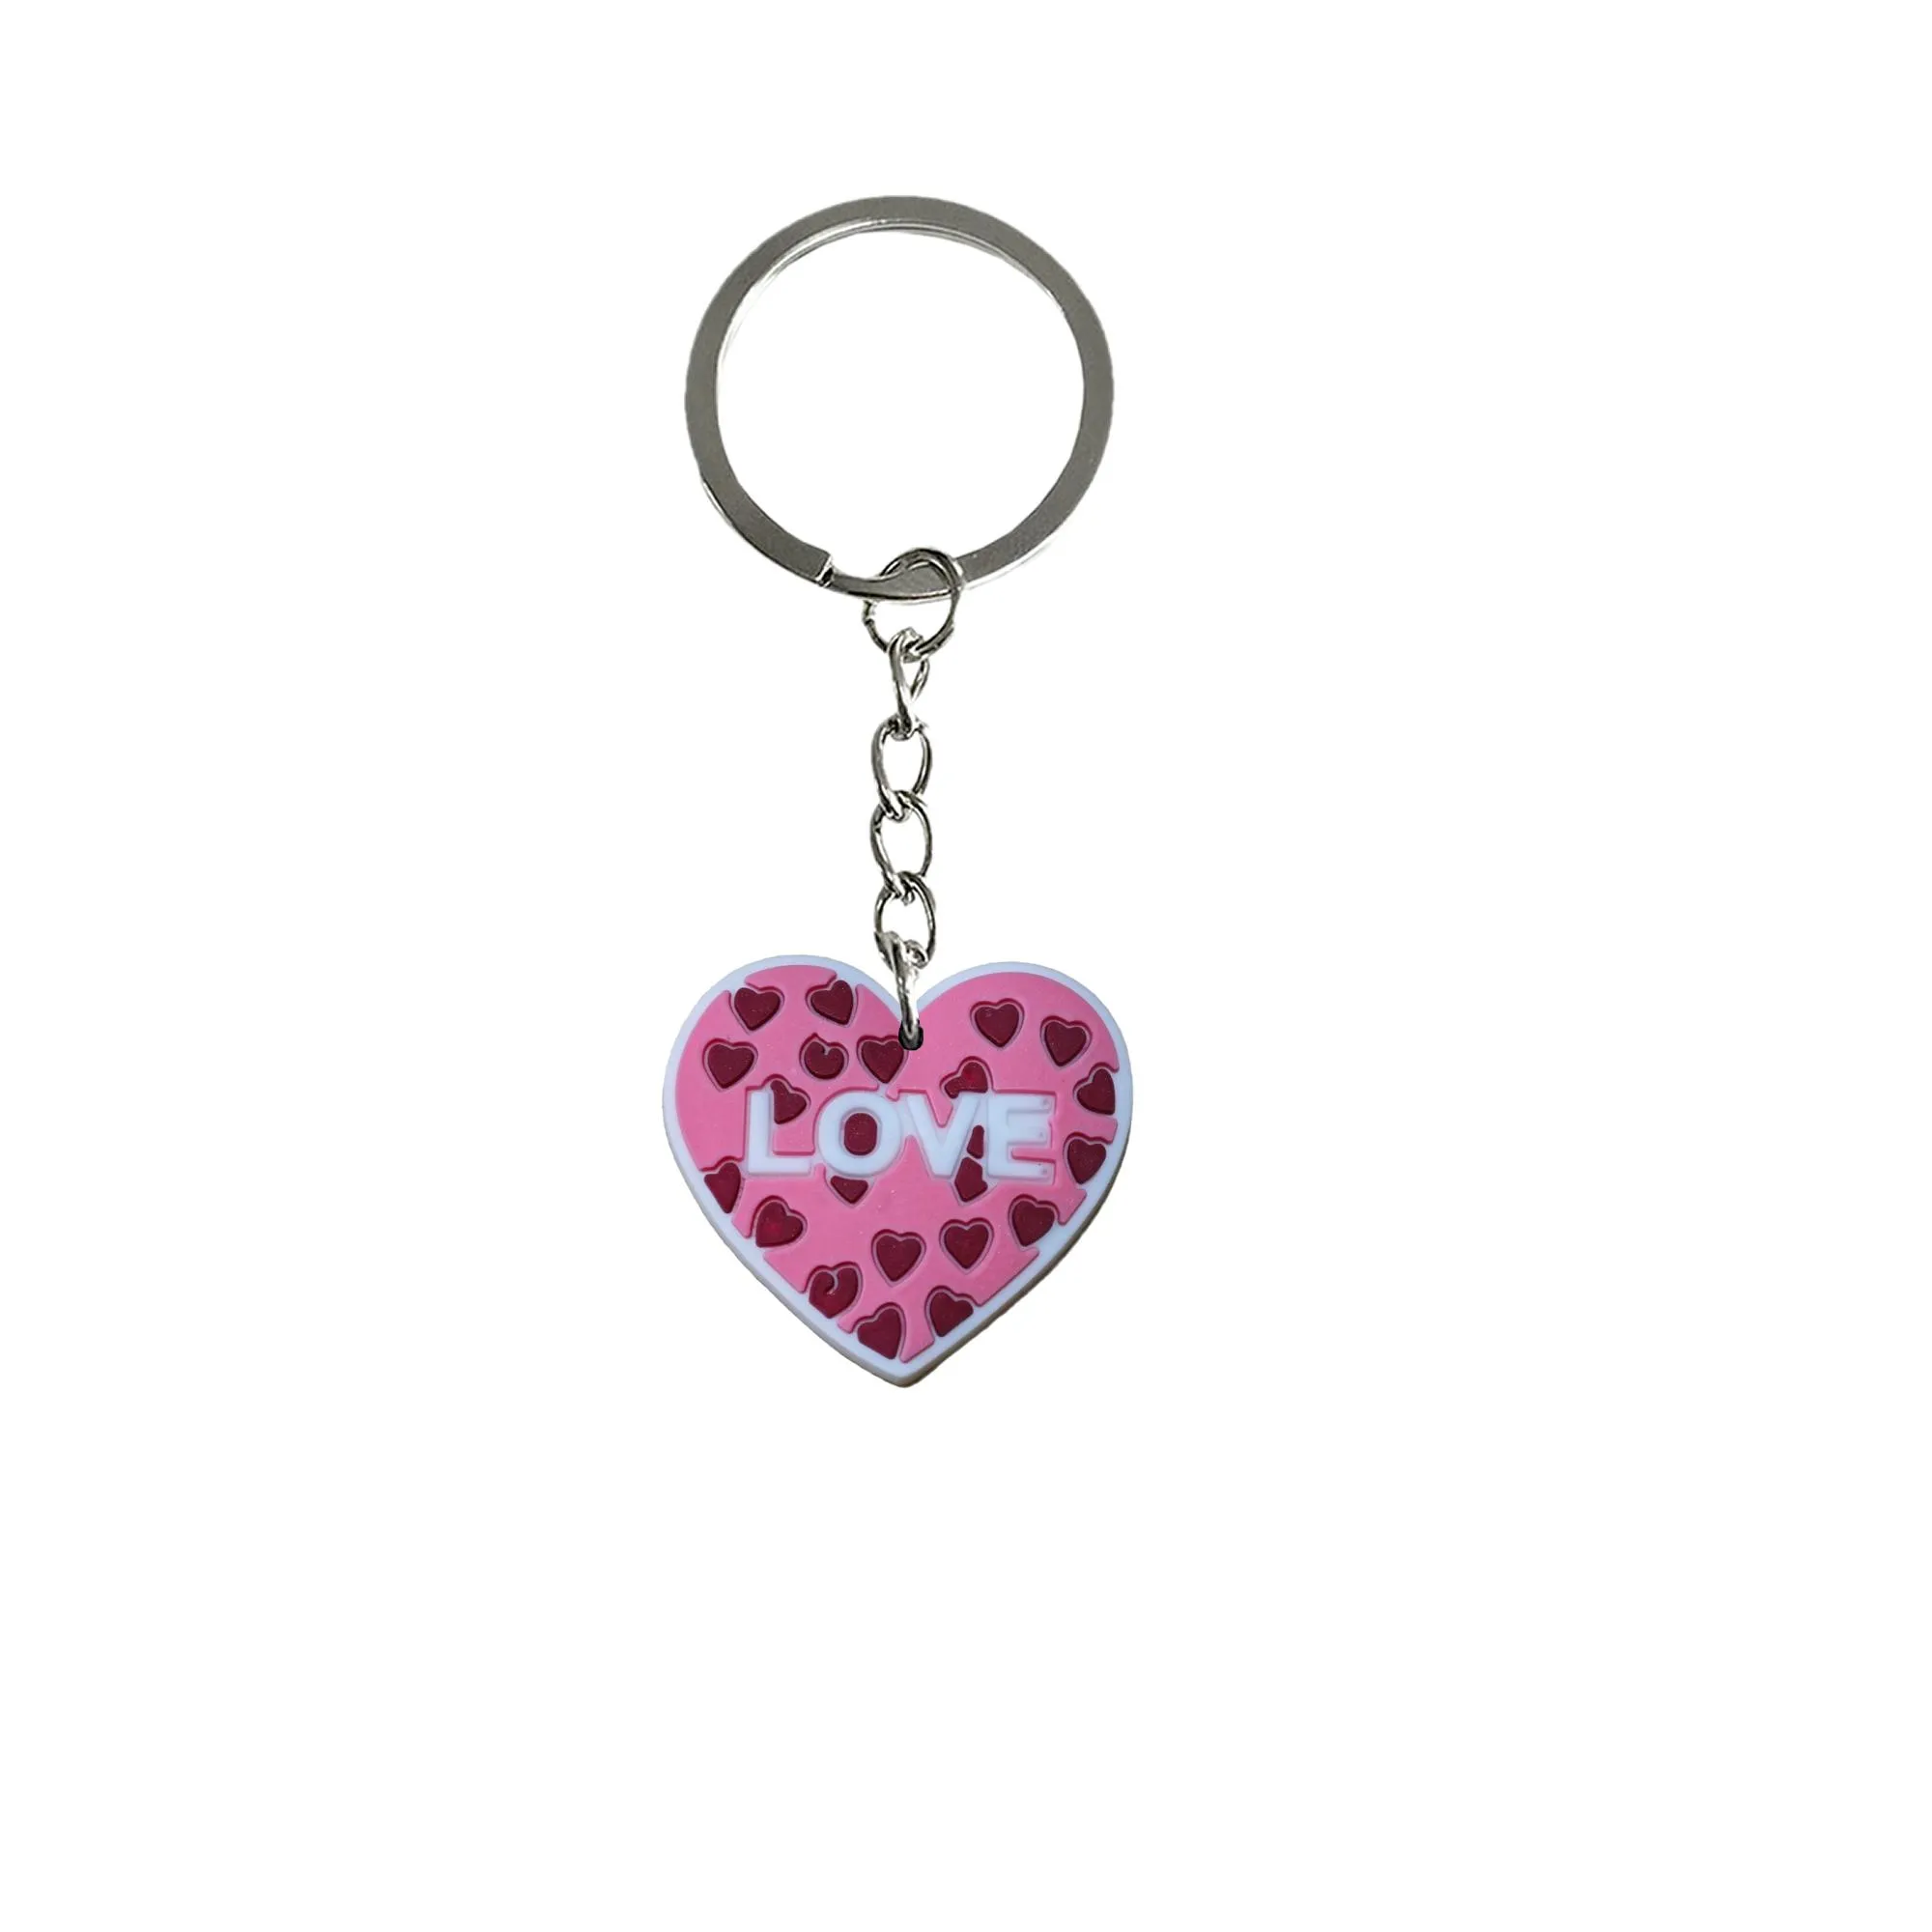 valentines day three keychain keychains tags goodie bag stuffer christmas gifts and holiday charms anime cool for backpacks keyring suitable schoolbag women couple backpack key chains